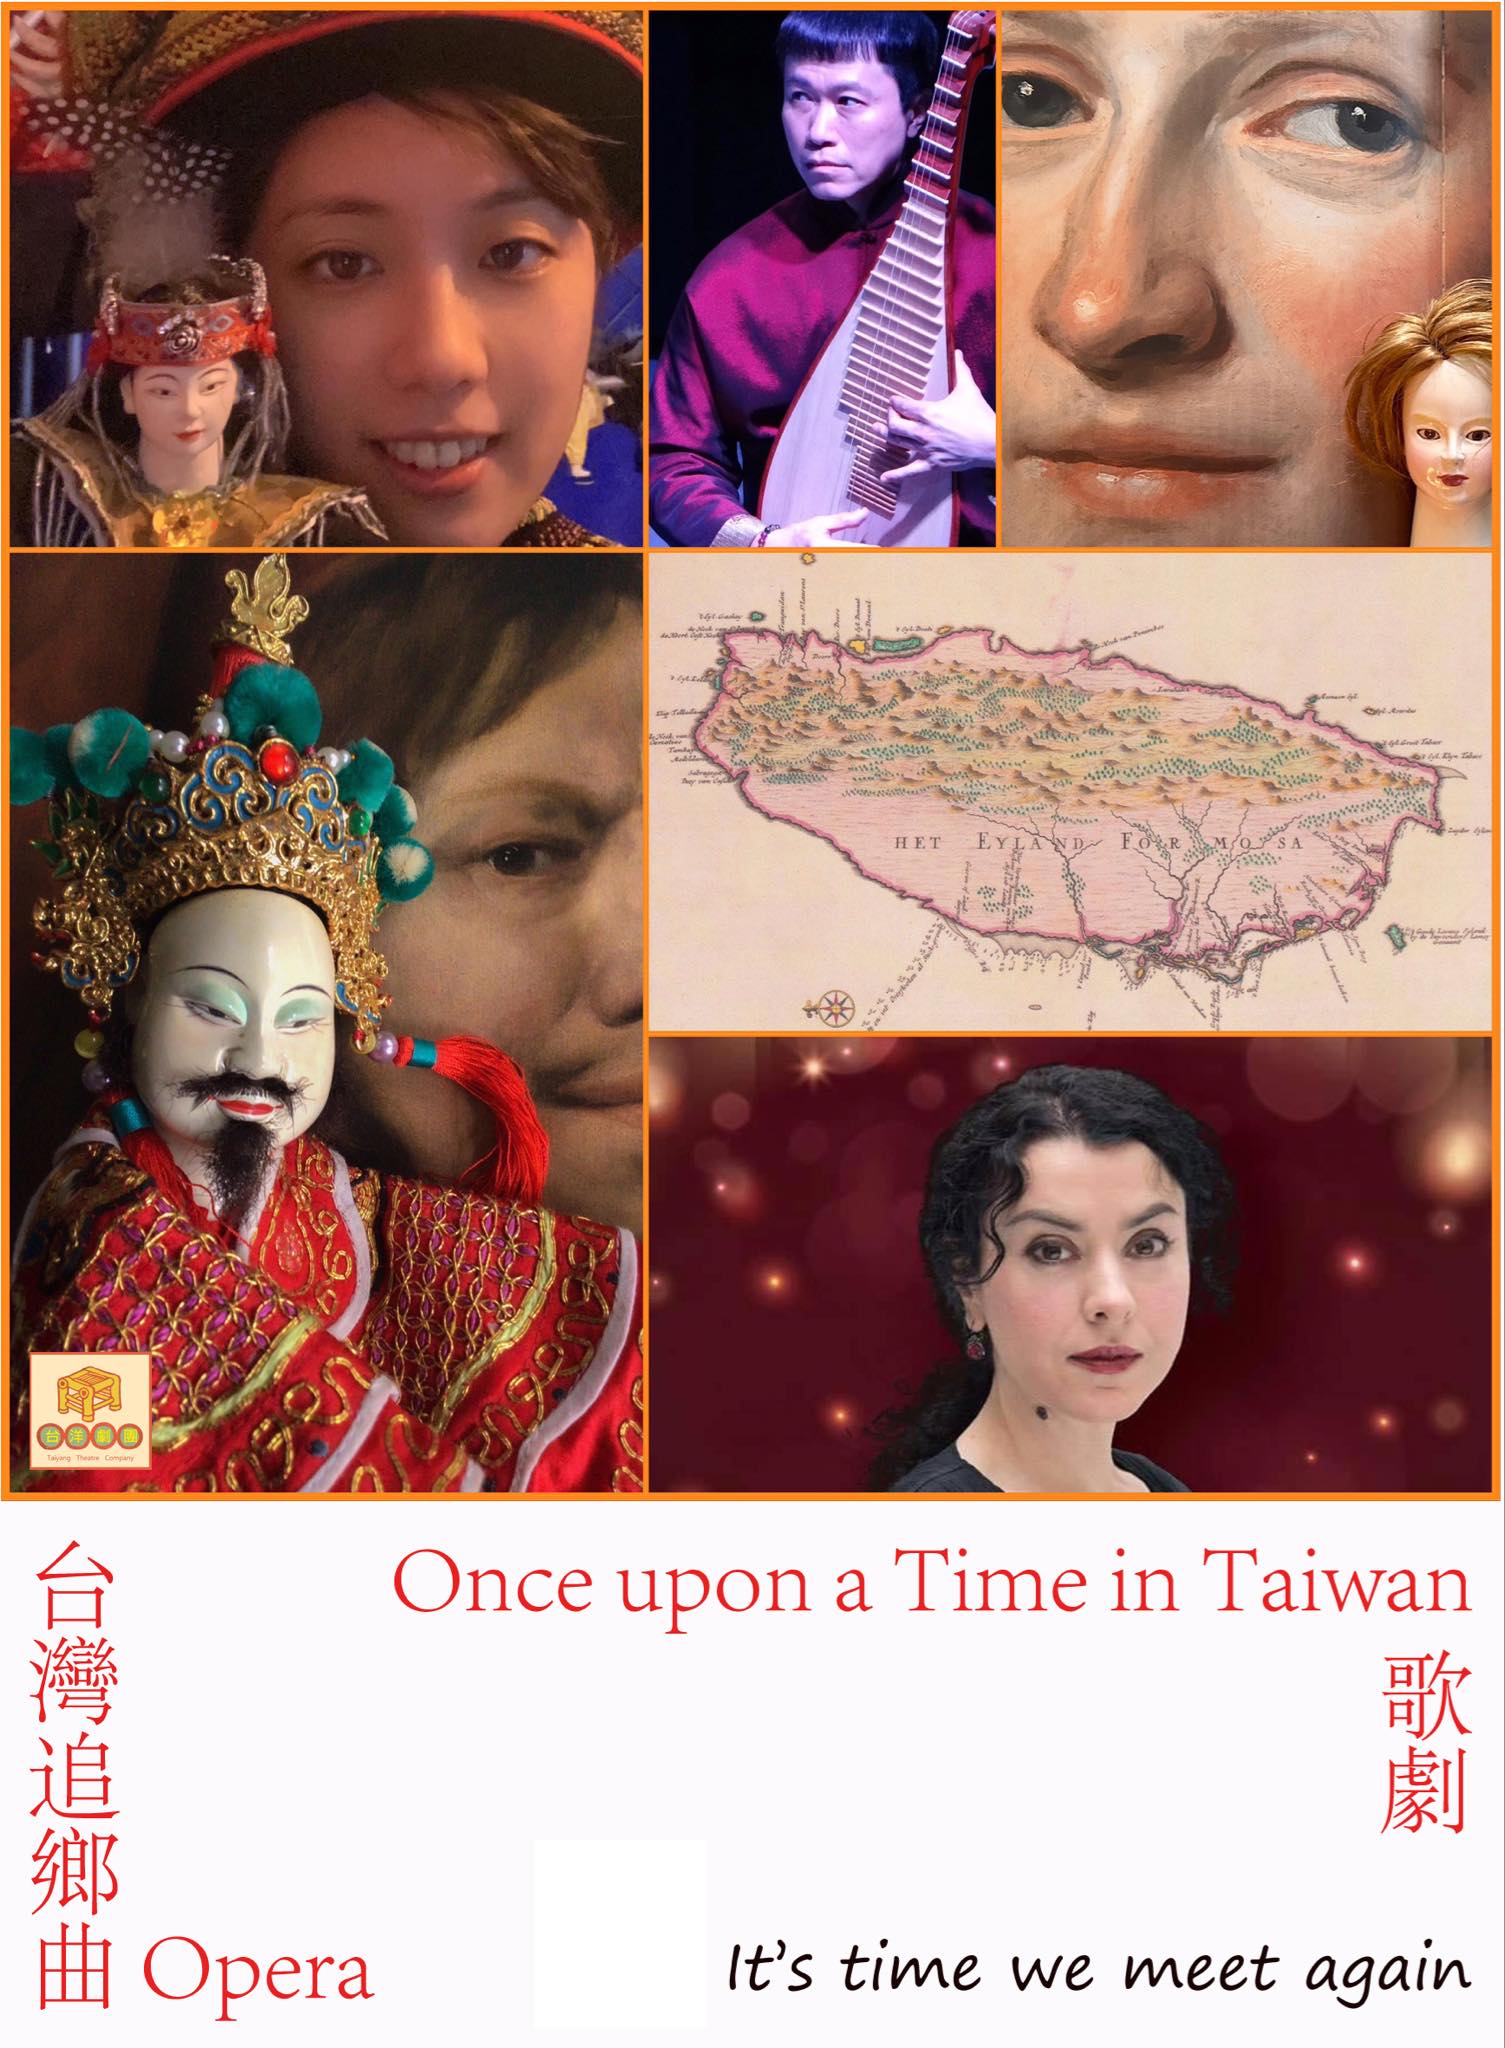 Once upon a Time in Taiwan will be staged as part of the 400th anniversary celebration of Tainan City. (Photo・Robin Ruizendaal)